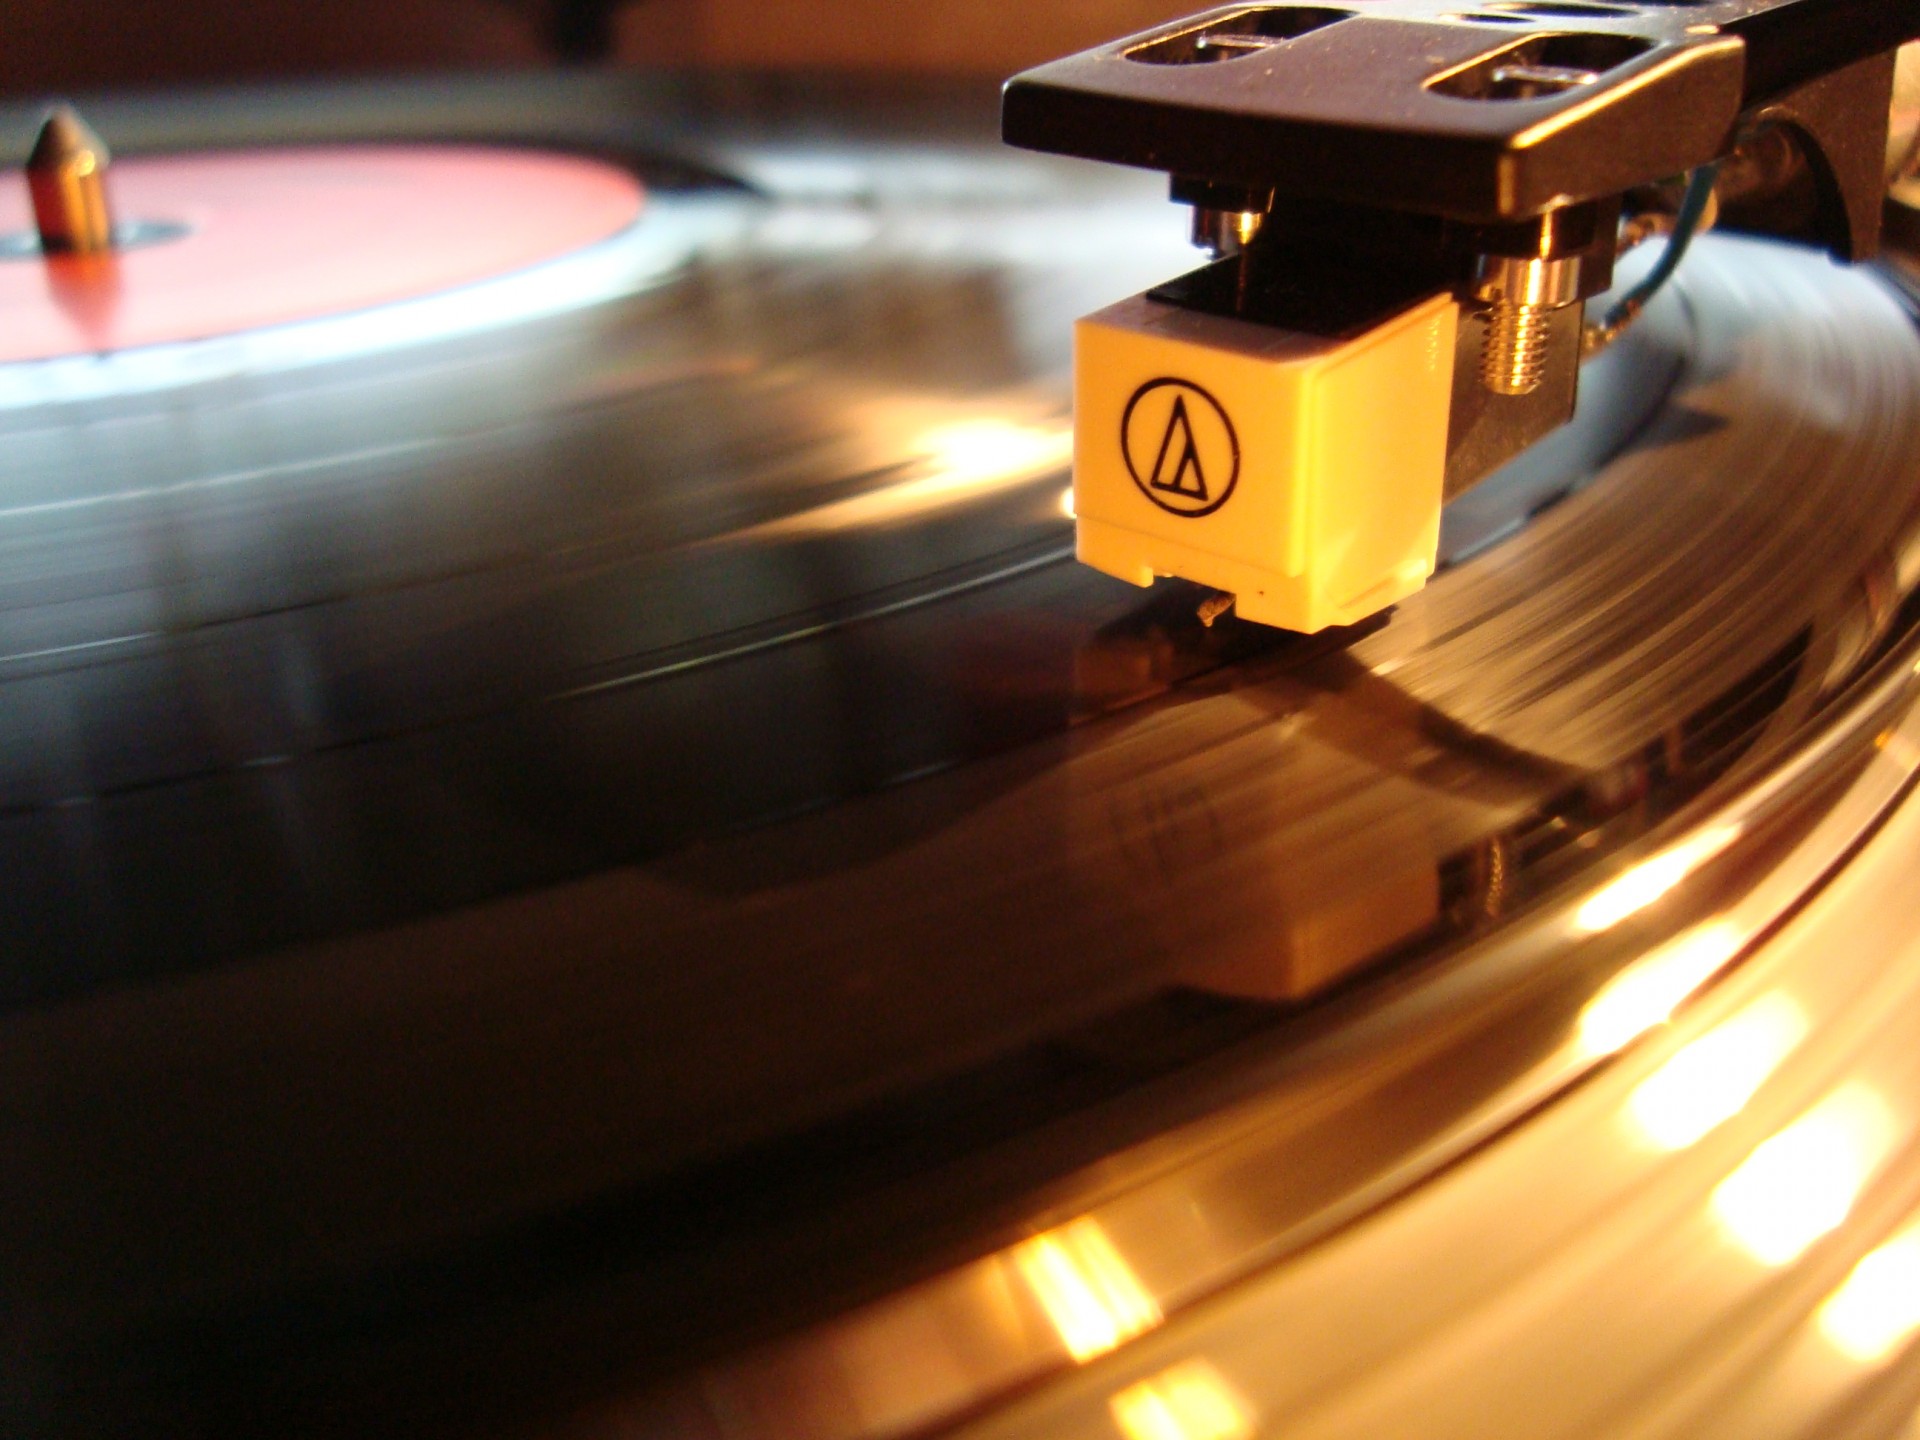 Needle Of A Record Player